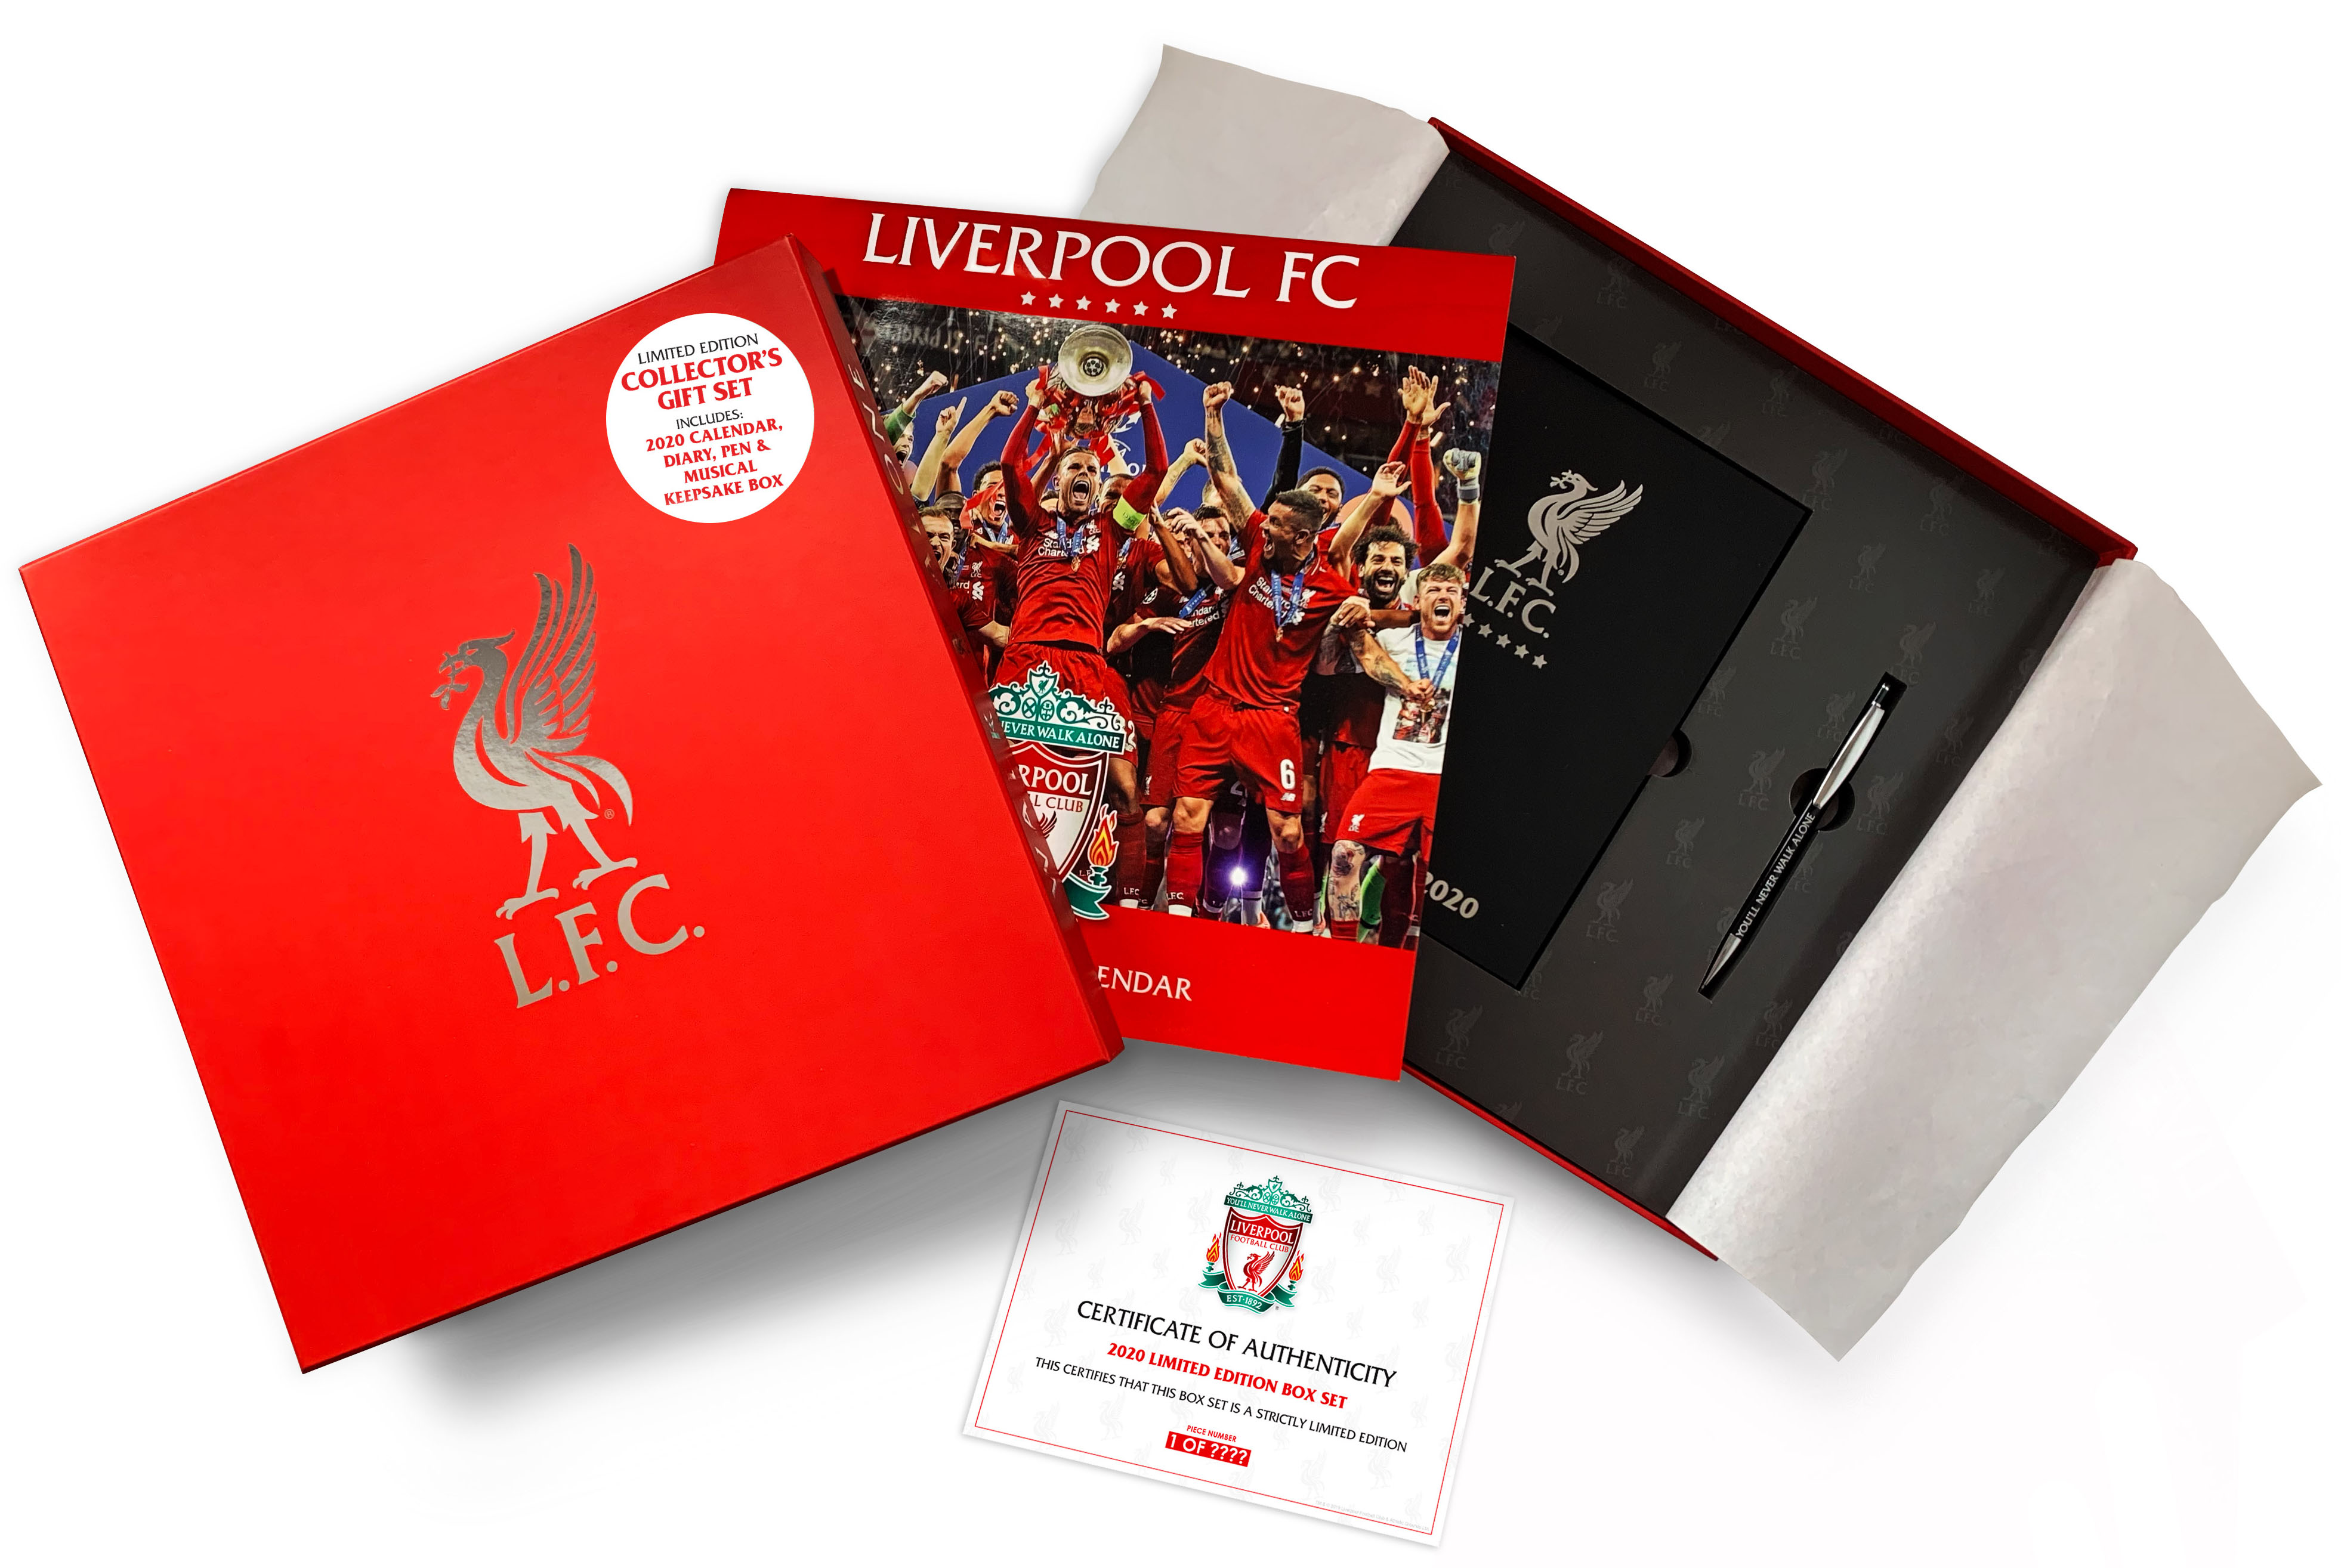 Above: Danilo’s Liverpool FC limited edition box set which plays the team’s anthem when the box is lifted. 